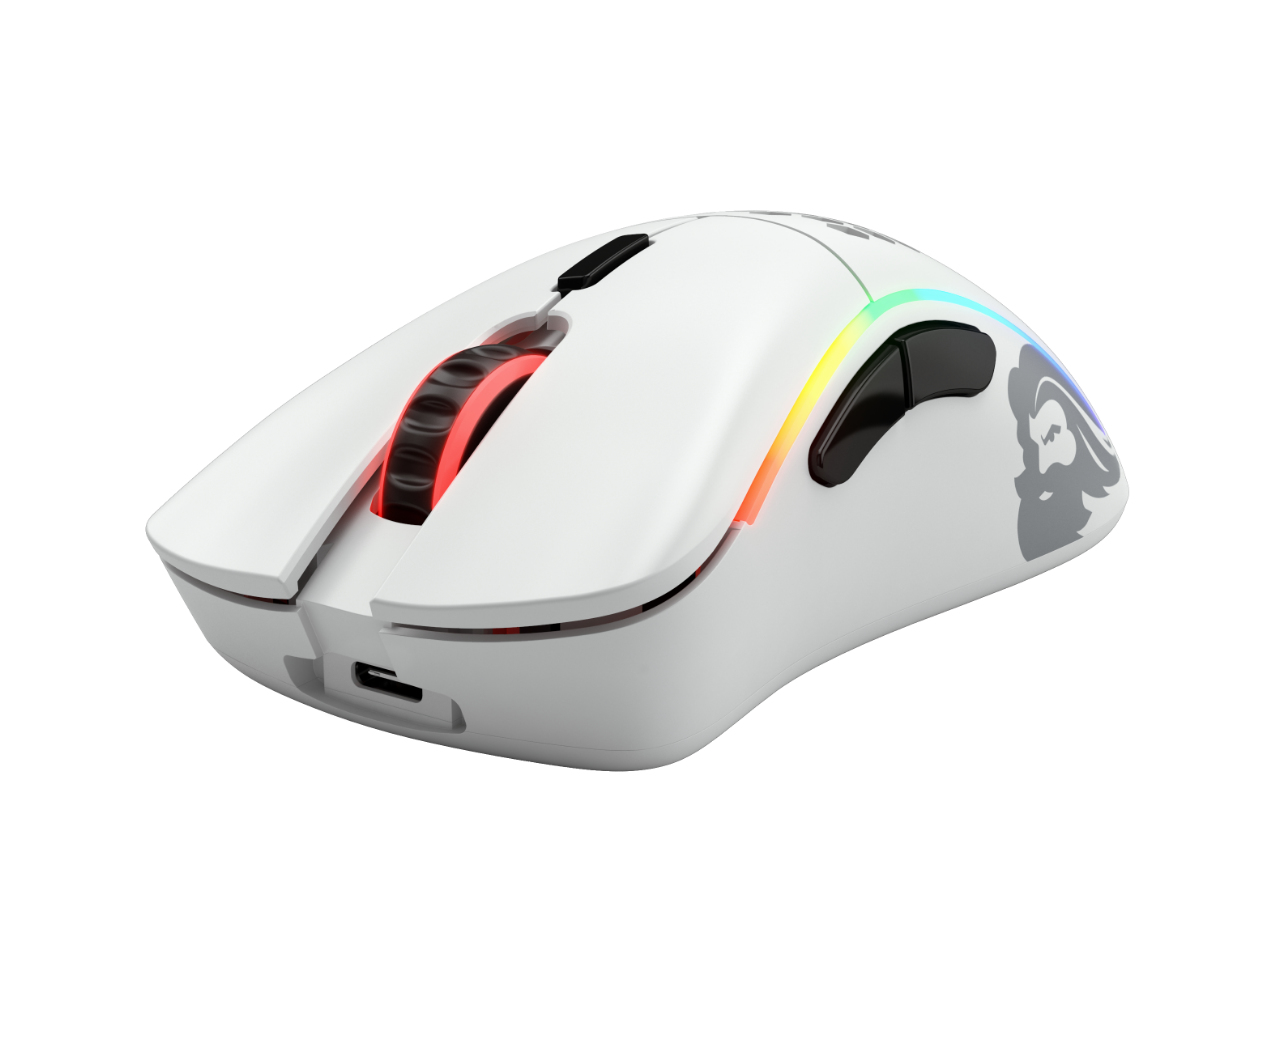 GLO-MS-DMW-MW GLORIOUS PC GAMING RACE Model D- Wireless RGB Optical Gaming Mouse - Matte White (GLO-MS-DMW-MW